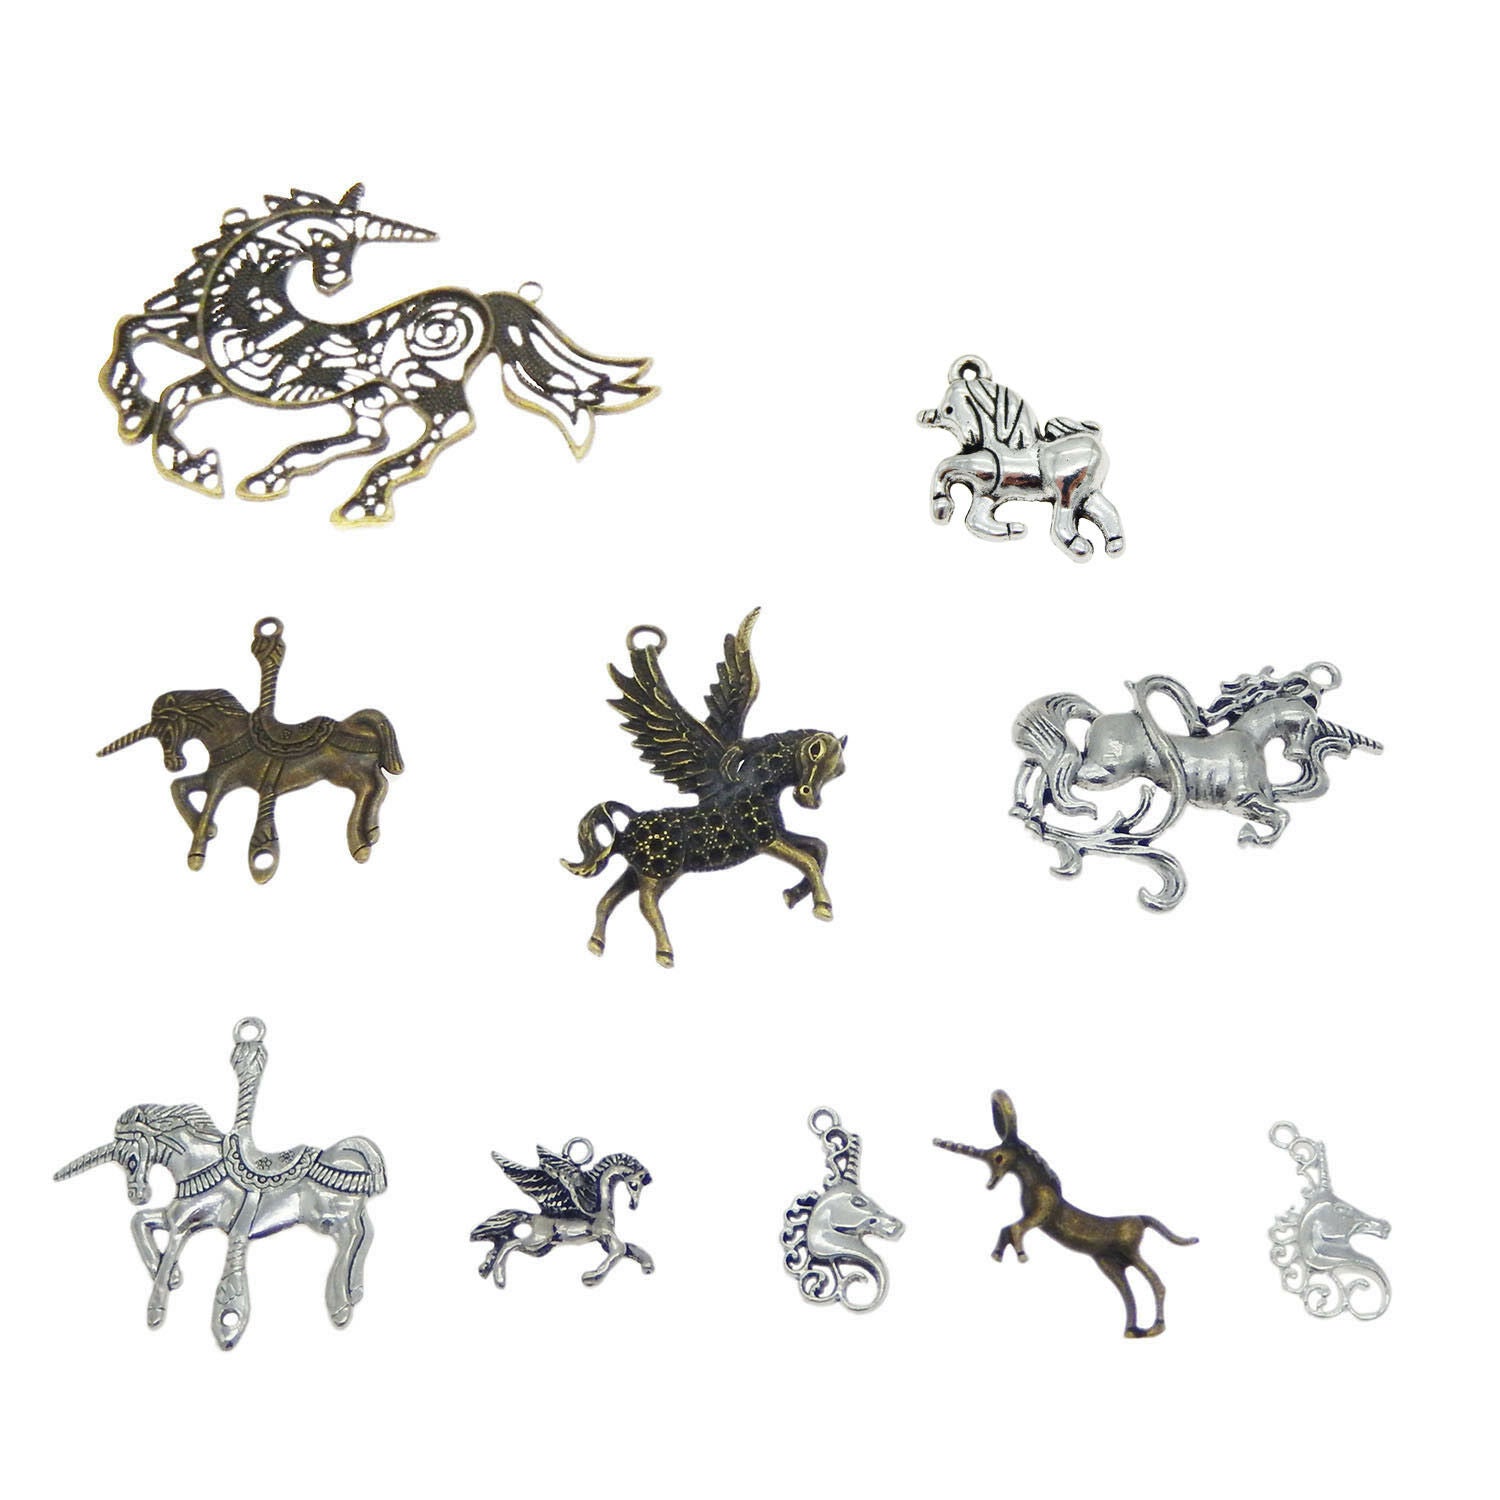 10 Mixed Metal Alloy Unicorn Charms Pendants DIY Jewelry Making Accessories